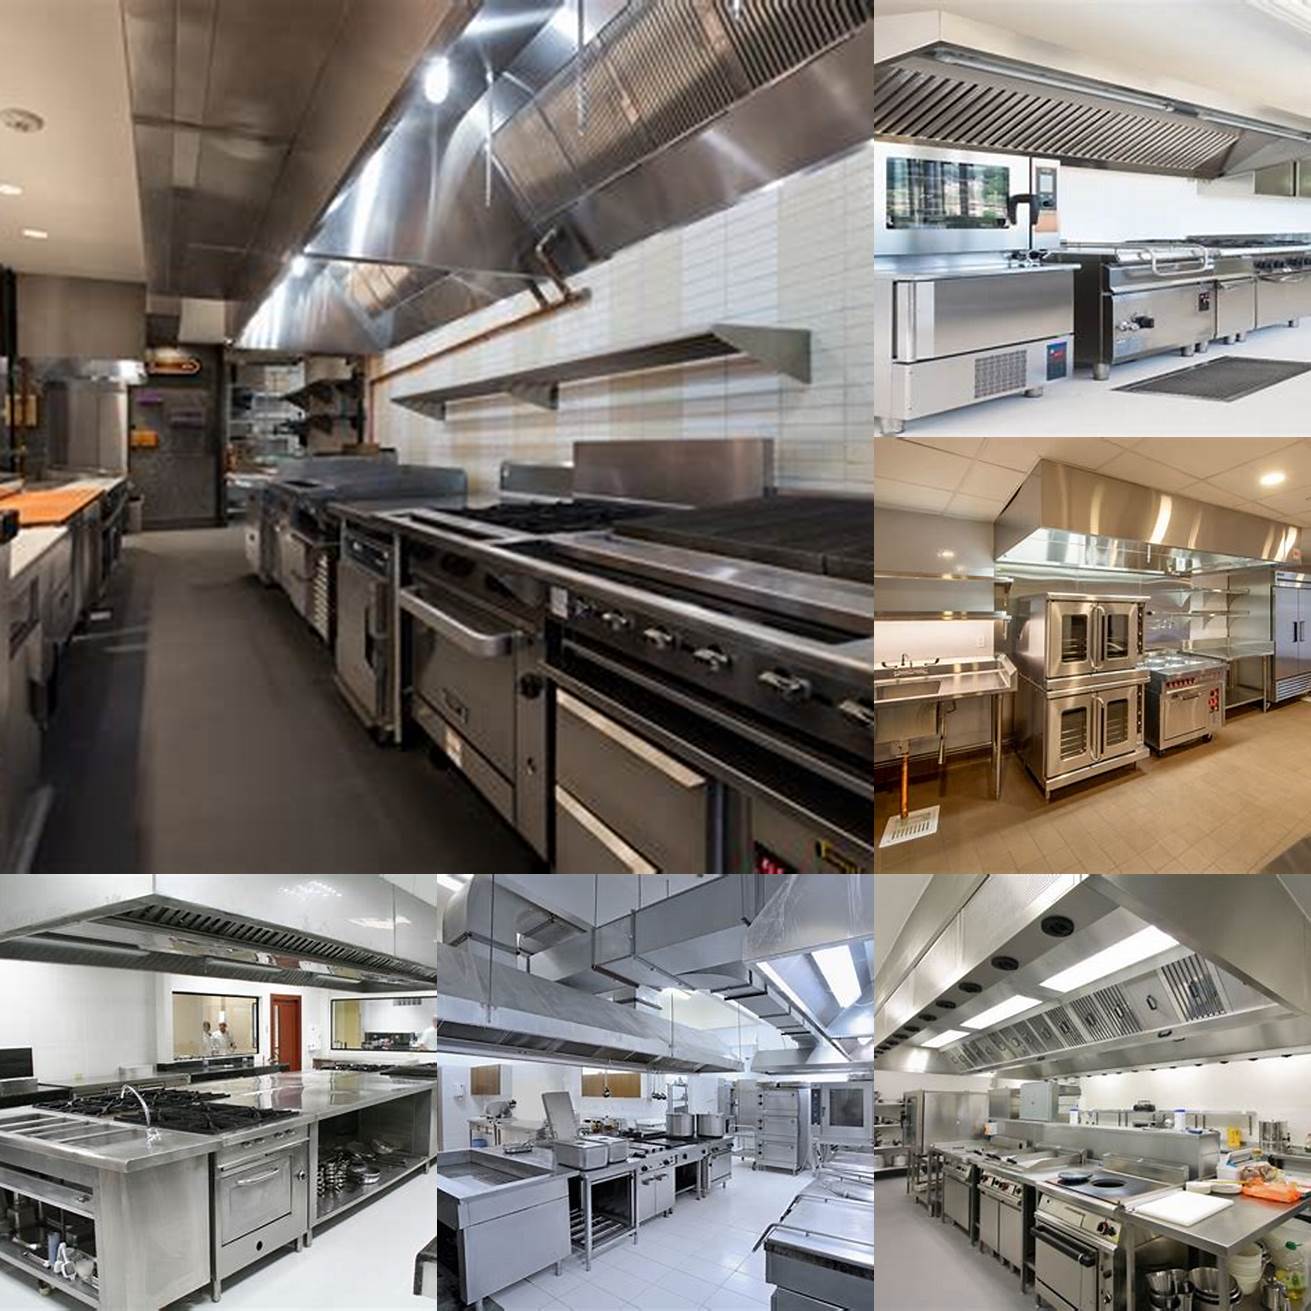 1 Increased efficiency Commercial kitchens are designed to handle a high volume of food production With the right equipment and layout you can maximize your productivity and efficiency